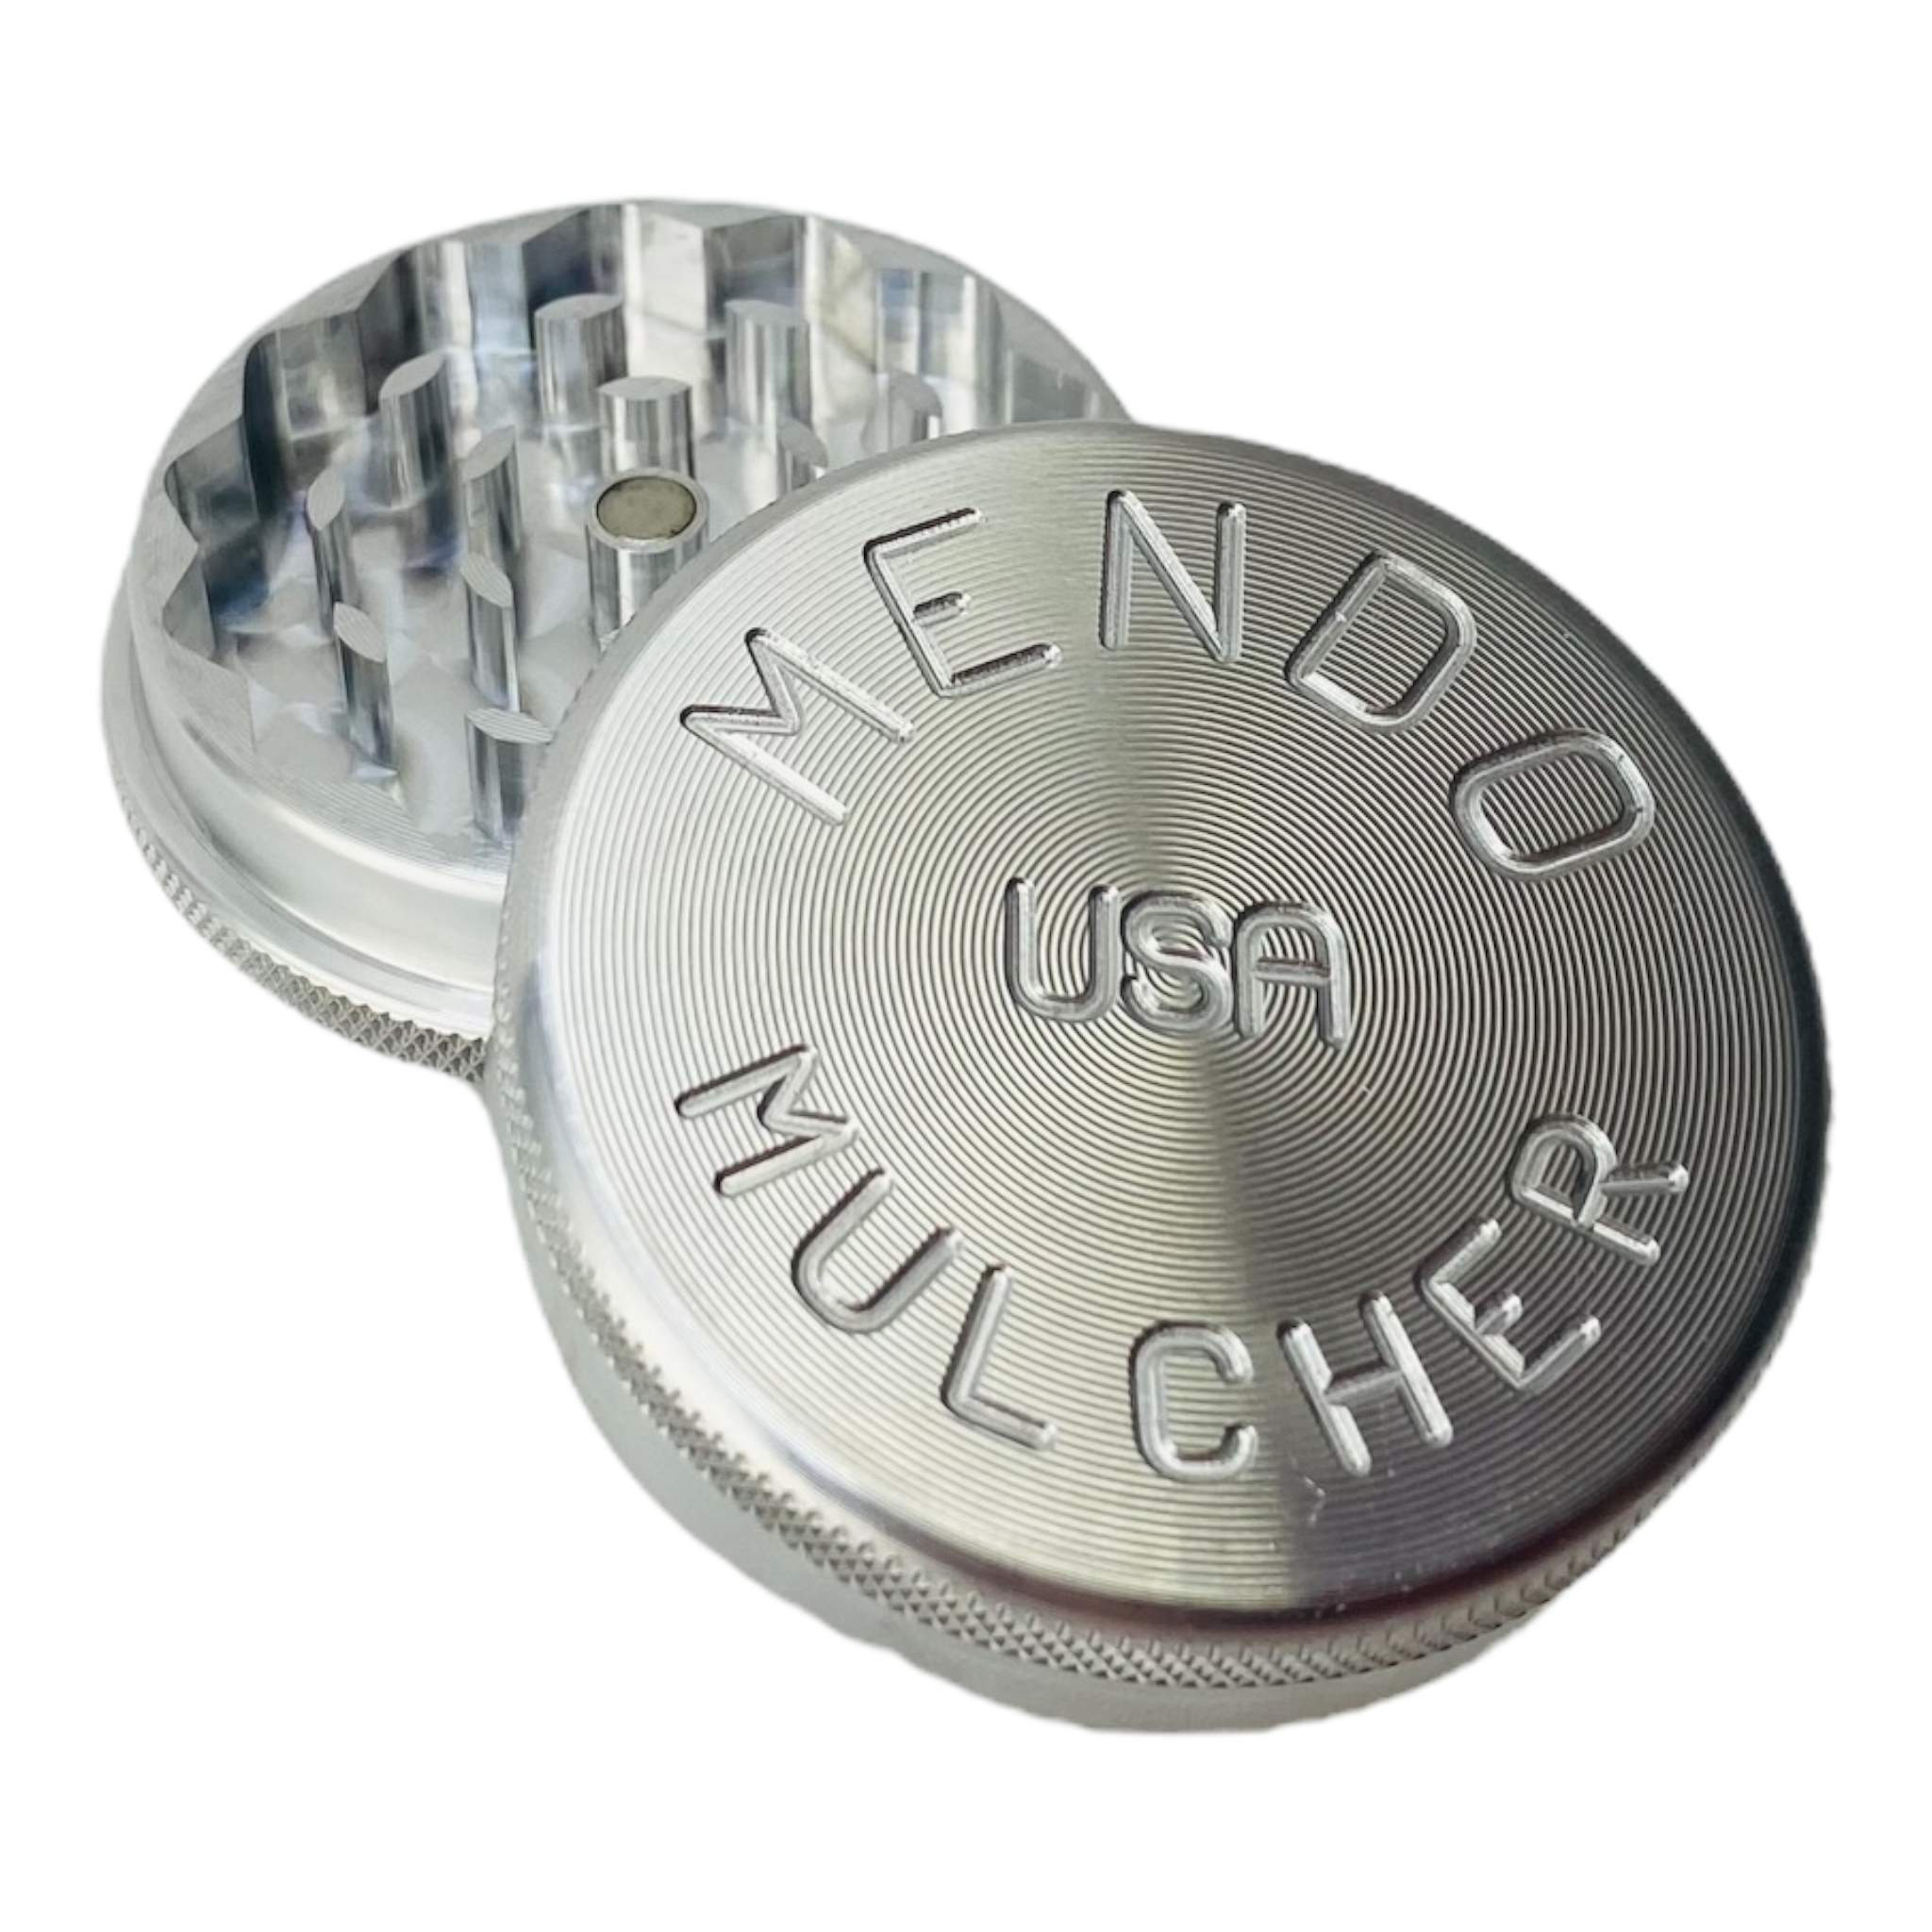 collection of Mendo Mulcher Grinders made out of aluminum